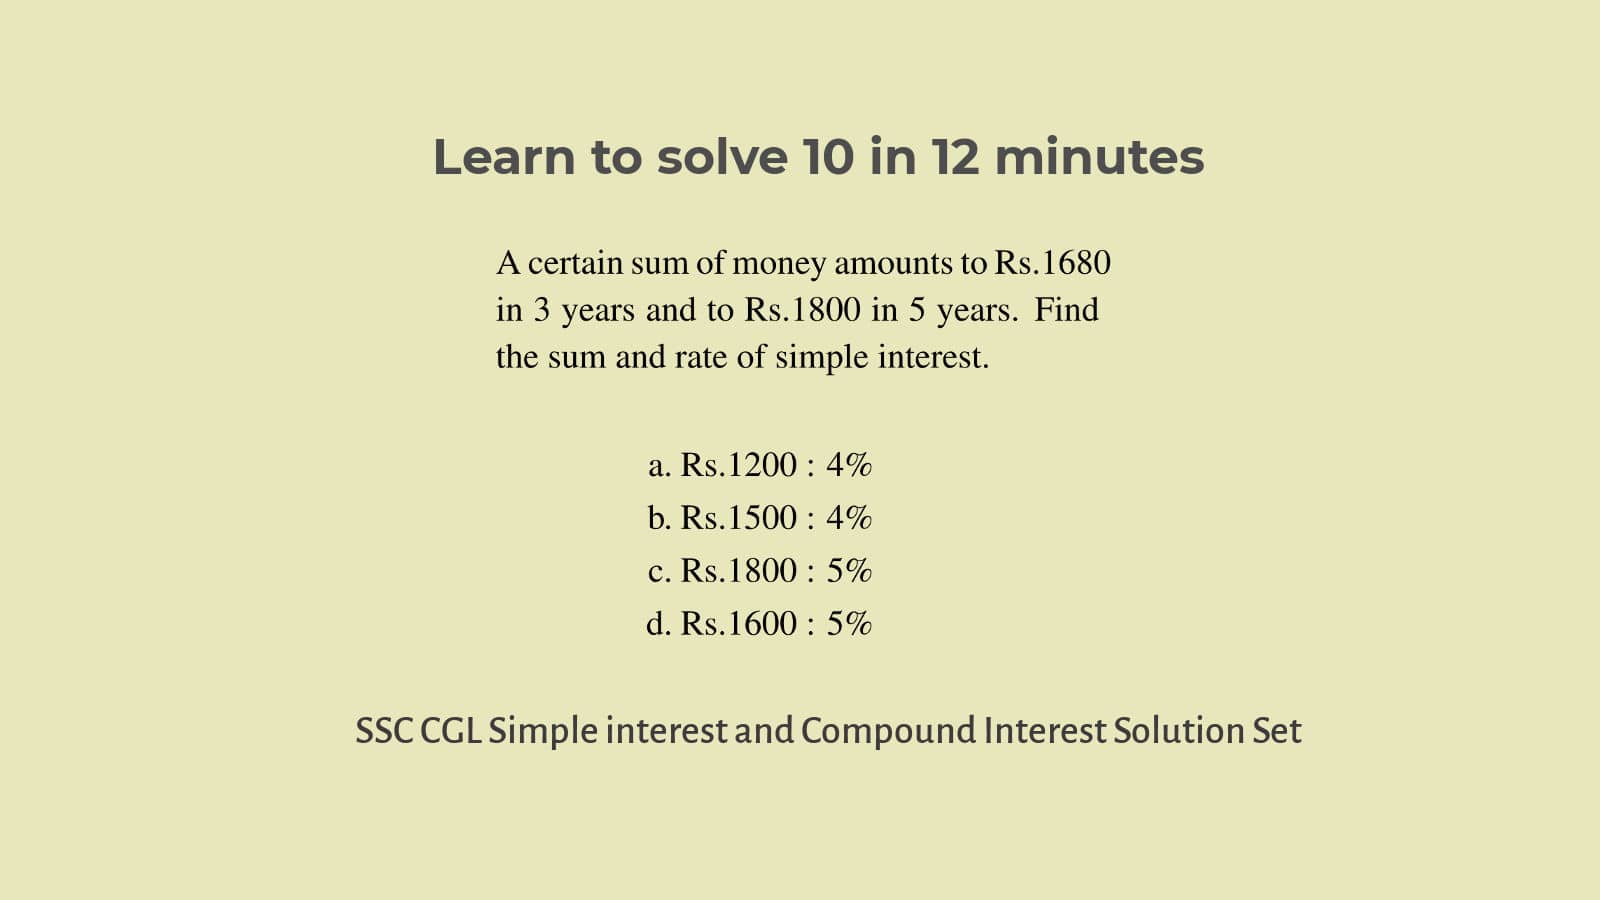 Solutions to Simple interest and compound interest questions for SSC CGL 50